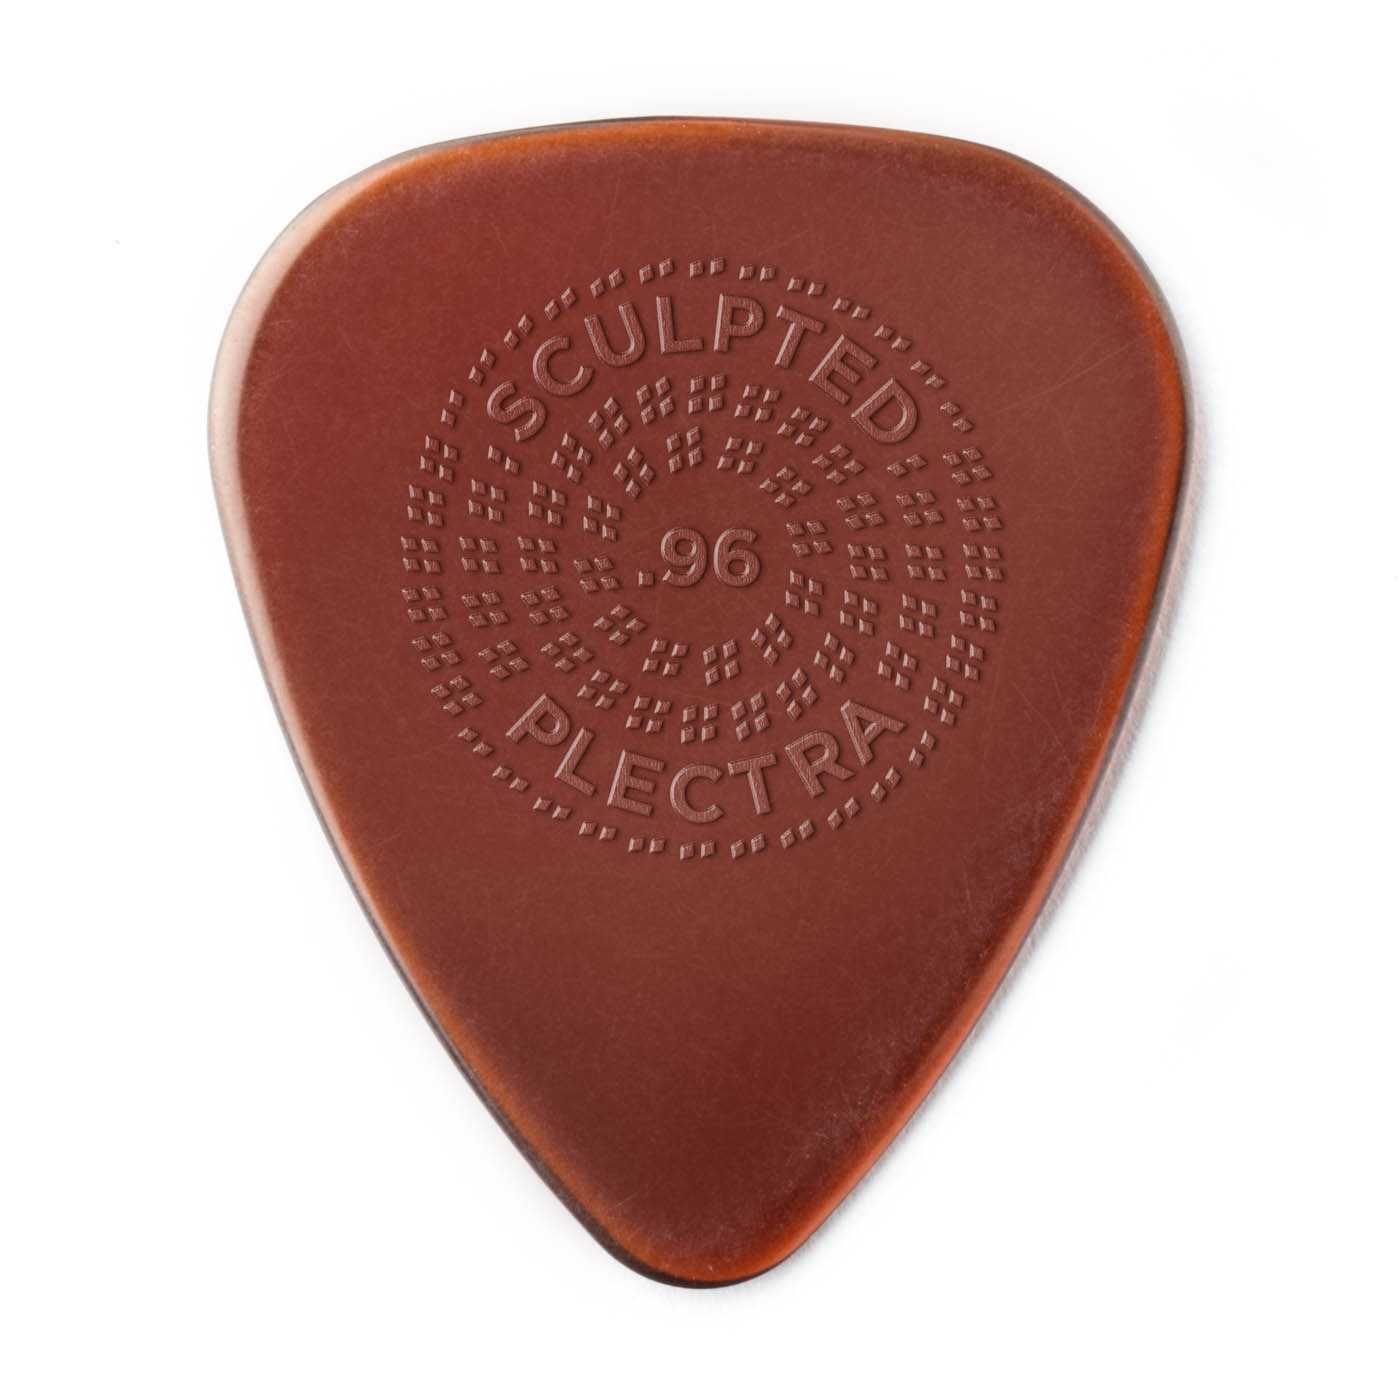 Image 2 of Dunlop Primetone Sculpted Plectra, Ultex Standard with Grip, 0.96MM Thick, Three Pack - SKU# PK510-096 : Product Type Accessories & Parts : Elderly Instruments